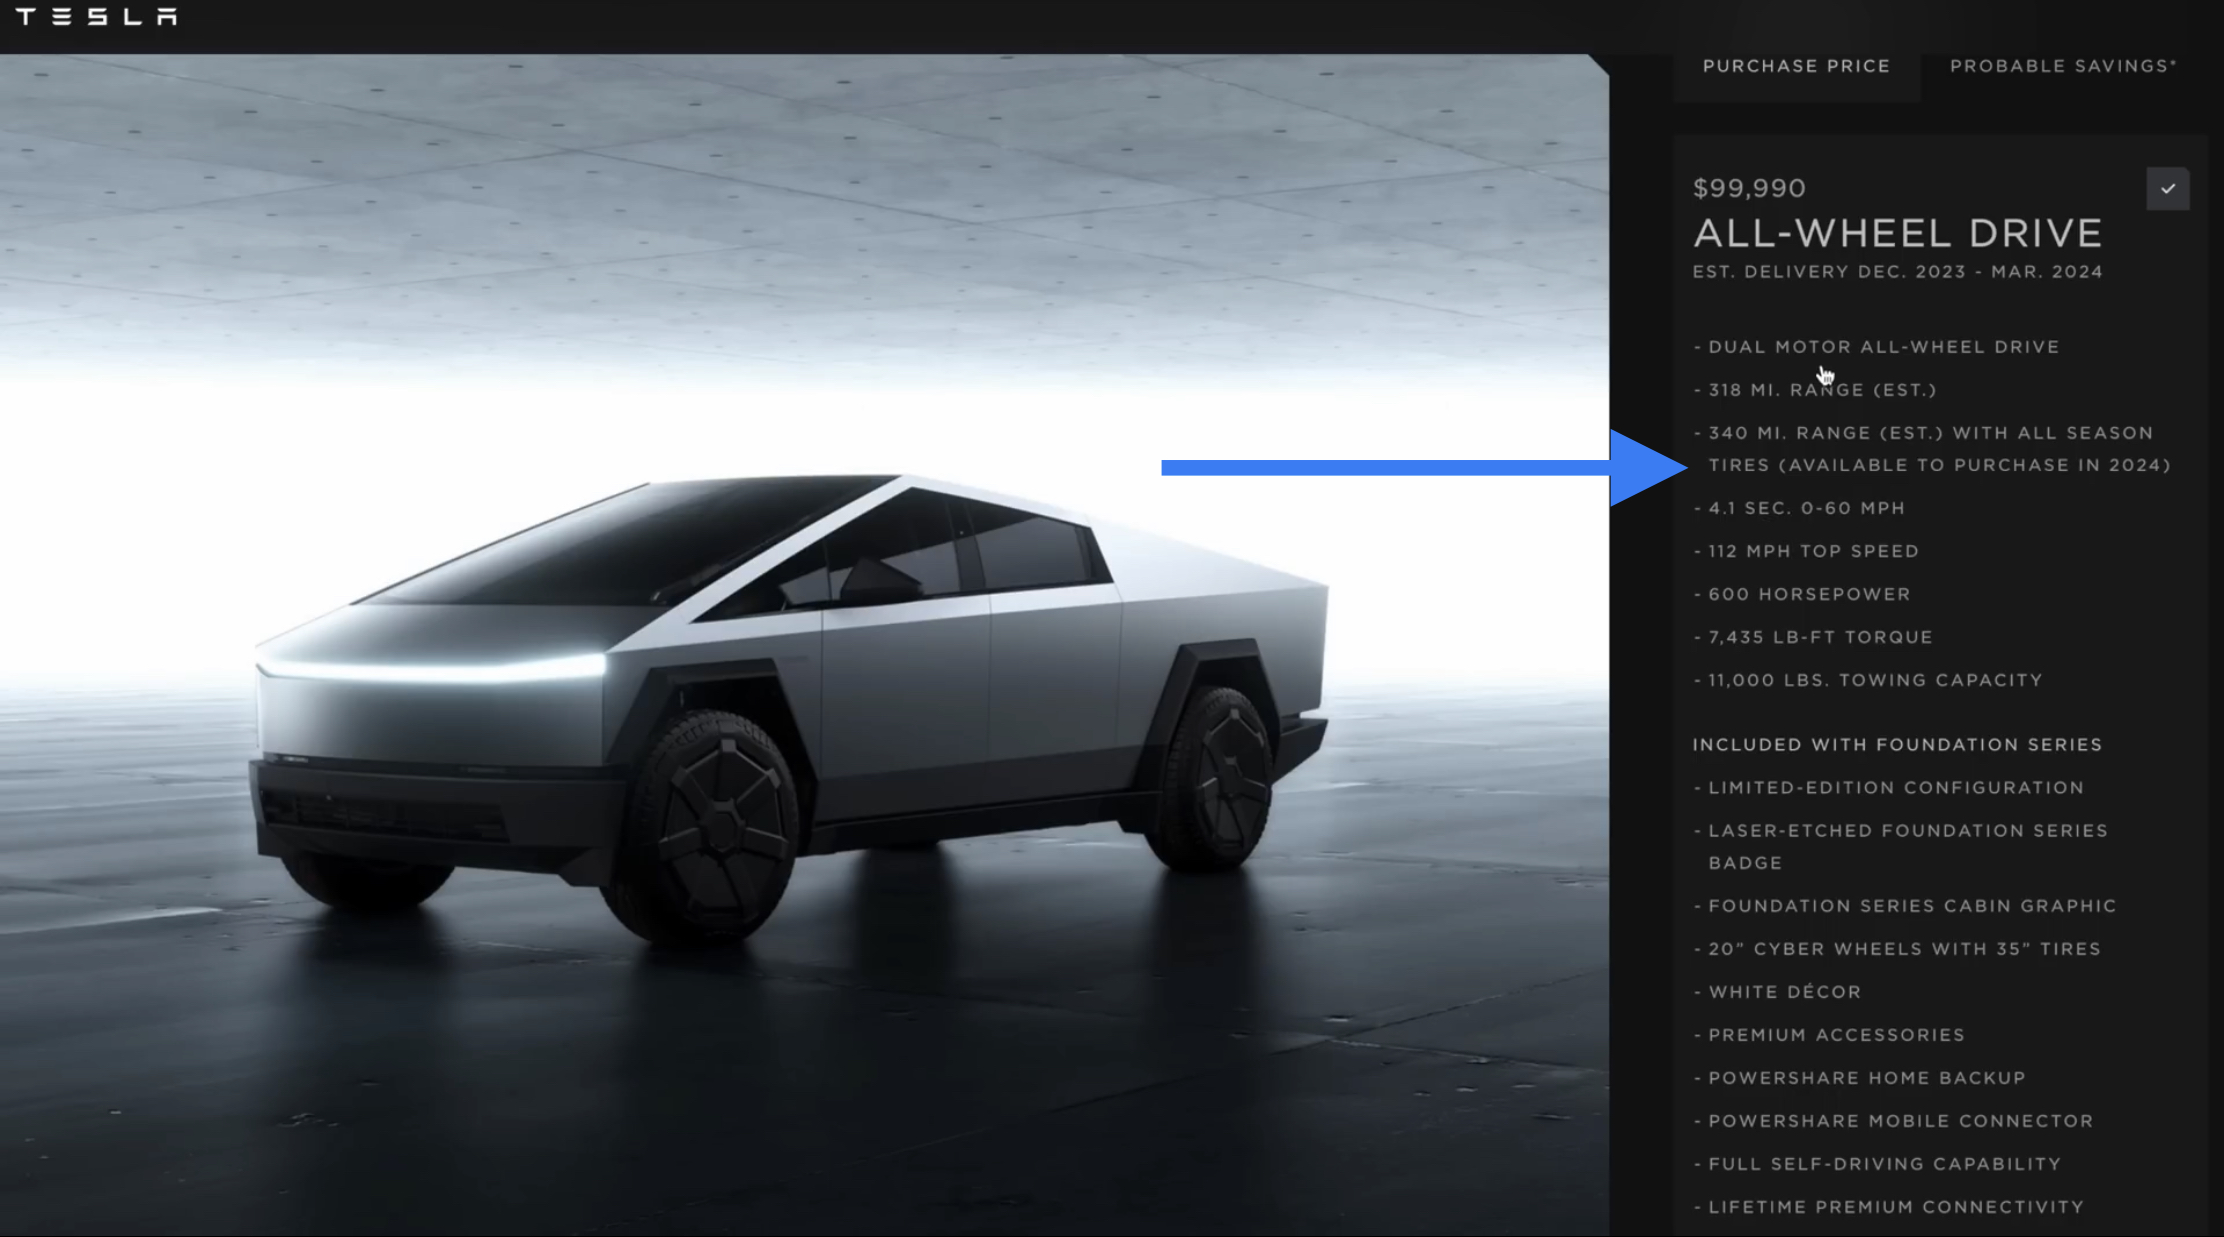 Tesla Cybertruck Just Ordered My Foundation Series Allocation! Post Your Invitations / Order Confirmations! 🙌 8B90C90D-8DF4-47E0-AD5C-36C0C085B597